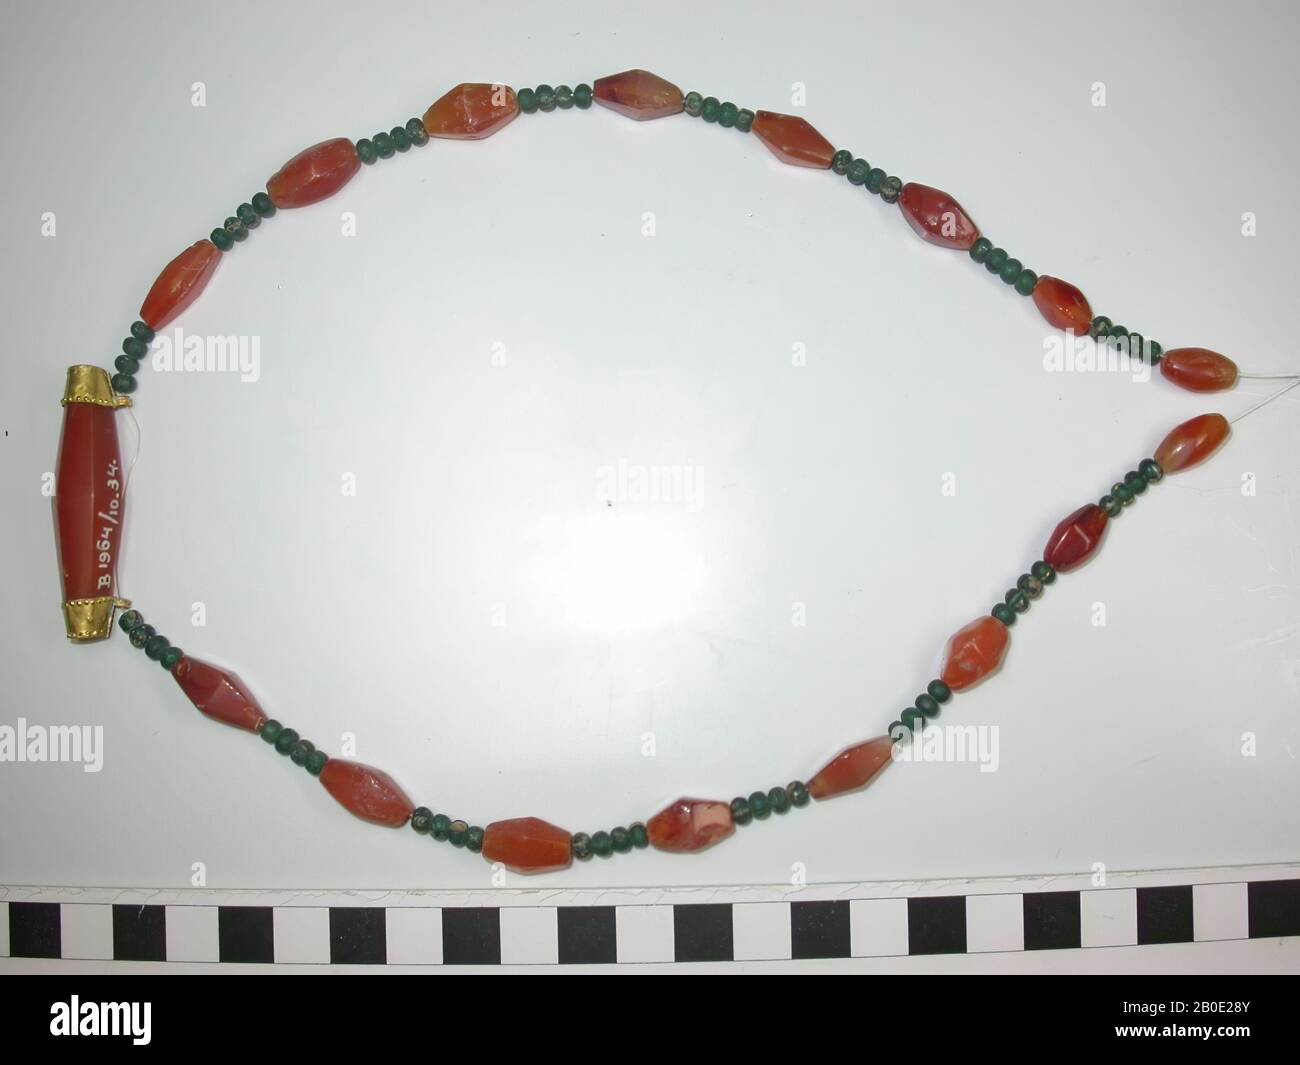 Necklace of round, elliptical and polygonal beads of glass and stone. Two elliptical beads of carnelian stone, 14 polygonal beads of carnelian stone and 64 small round beads of green glass, always with four between the stone beads. Finally, at the bottom of the middle, a very long polygonal bead of carnelian stone between cap-like golden catches with pearl edges, rosettes and suspension eyes. All beads completely and almost flawlessly preserved, everything on a modern cord strung. Total: 81 beads., Ornament, glass, metal, gold, stone, L 24 cm, 600-200 BC, Iran Stock Photo